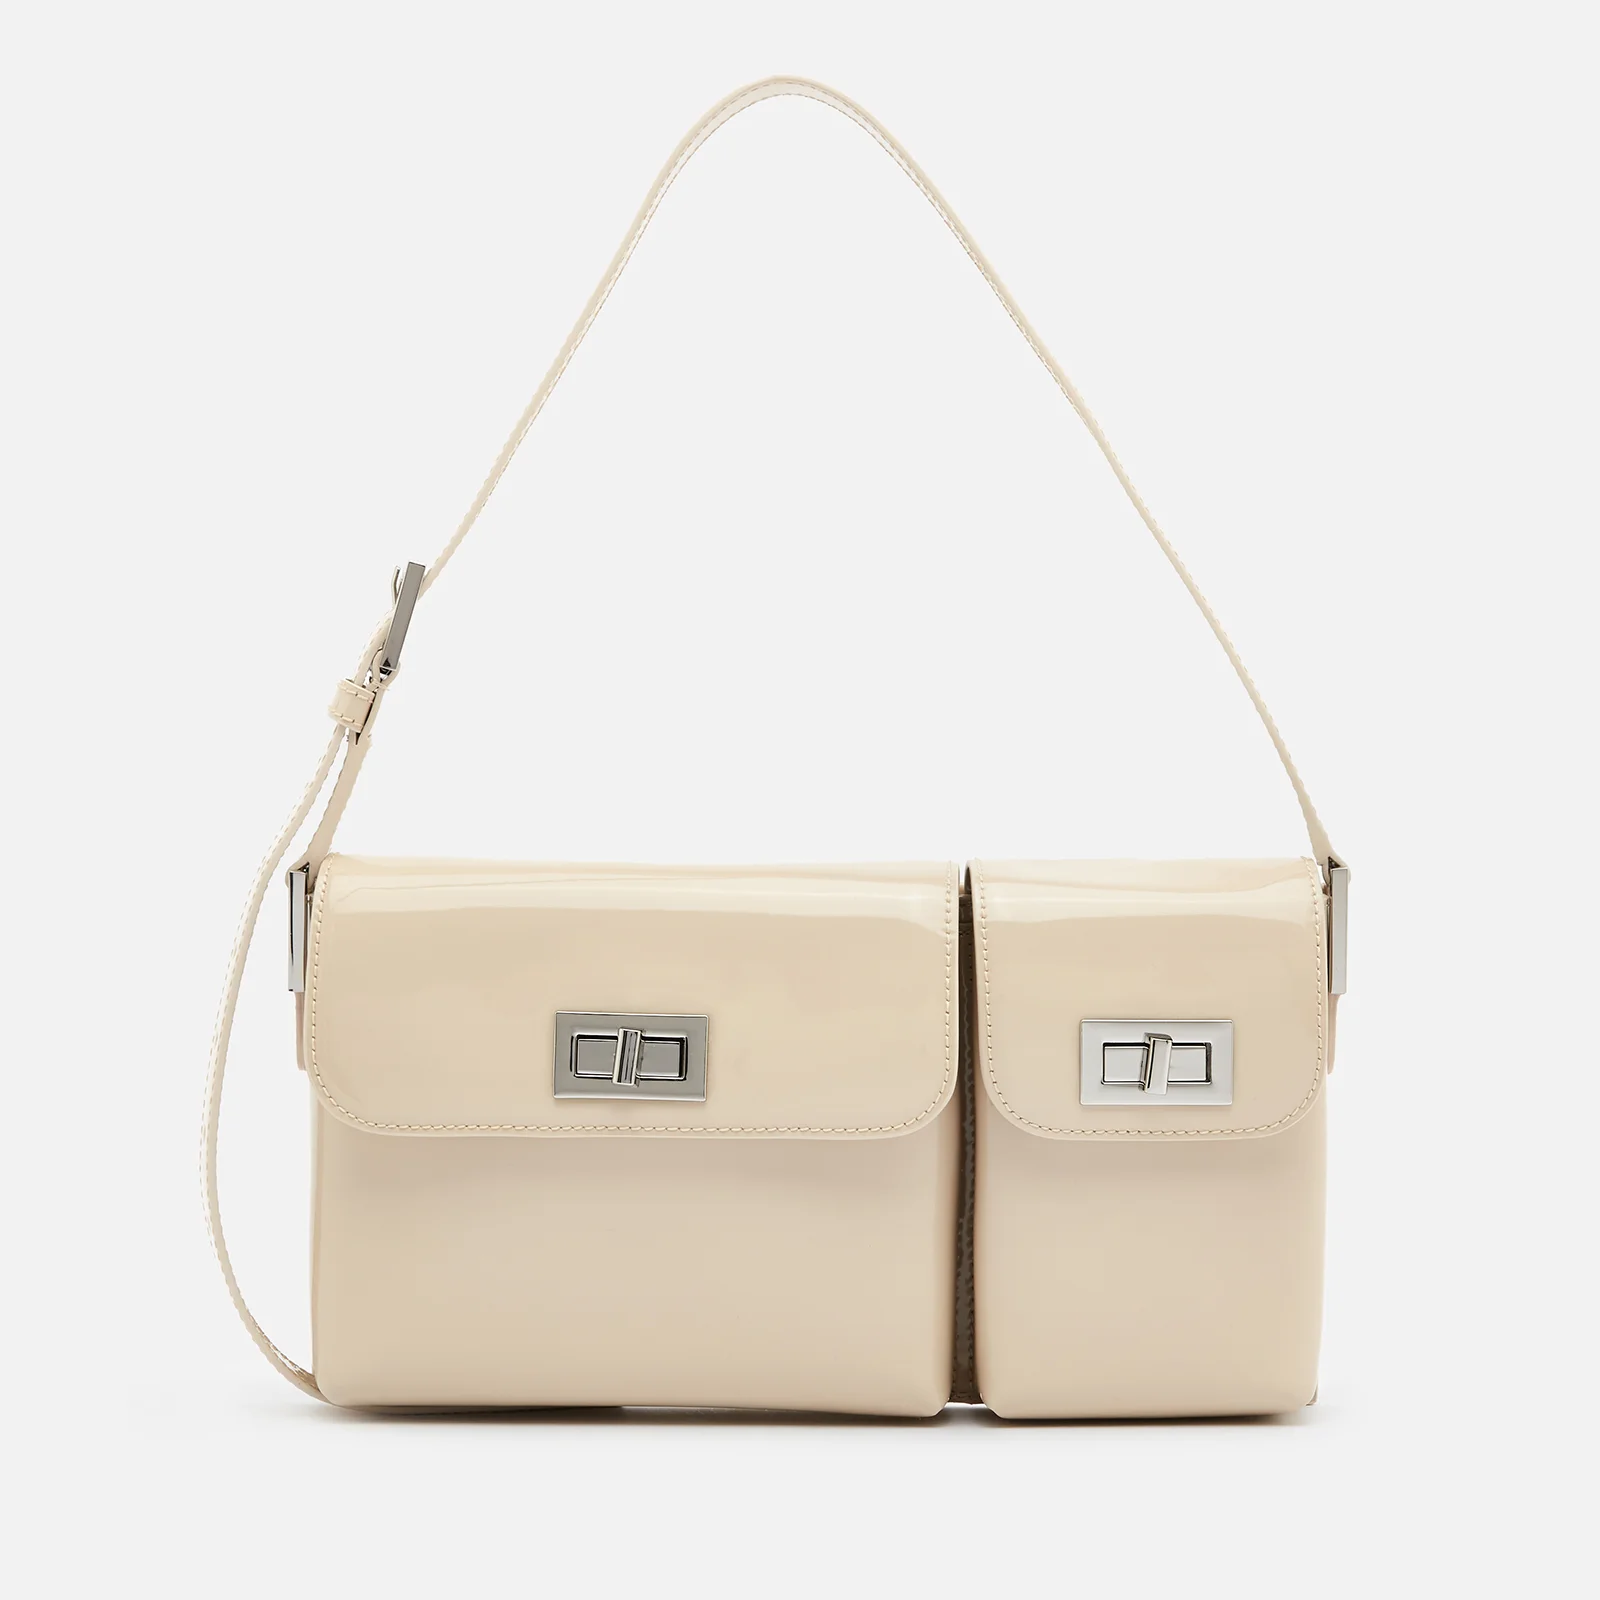 BY FAR Women's Billy Patent Leather Shoulder Bag - Cream Image 1